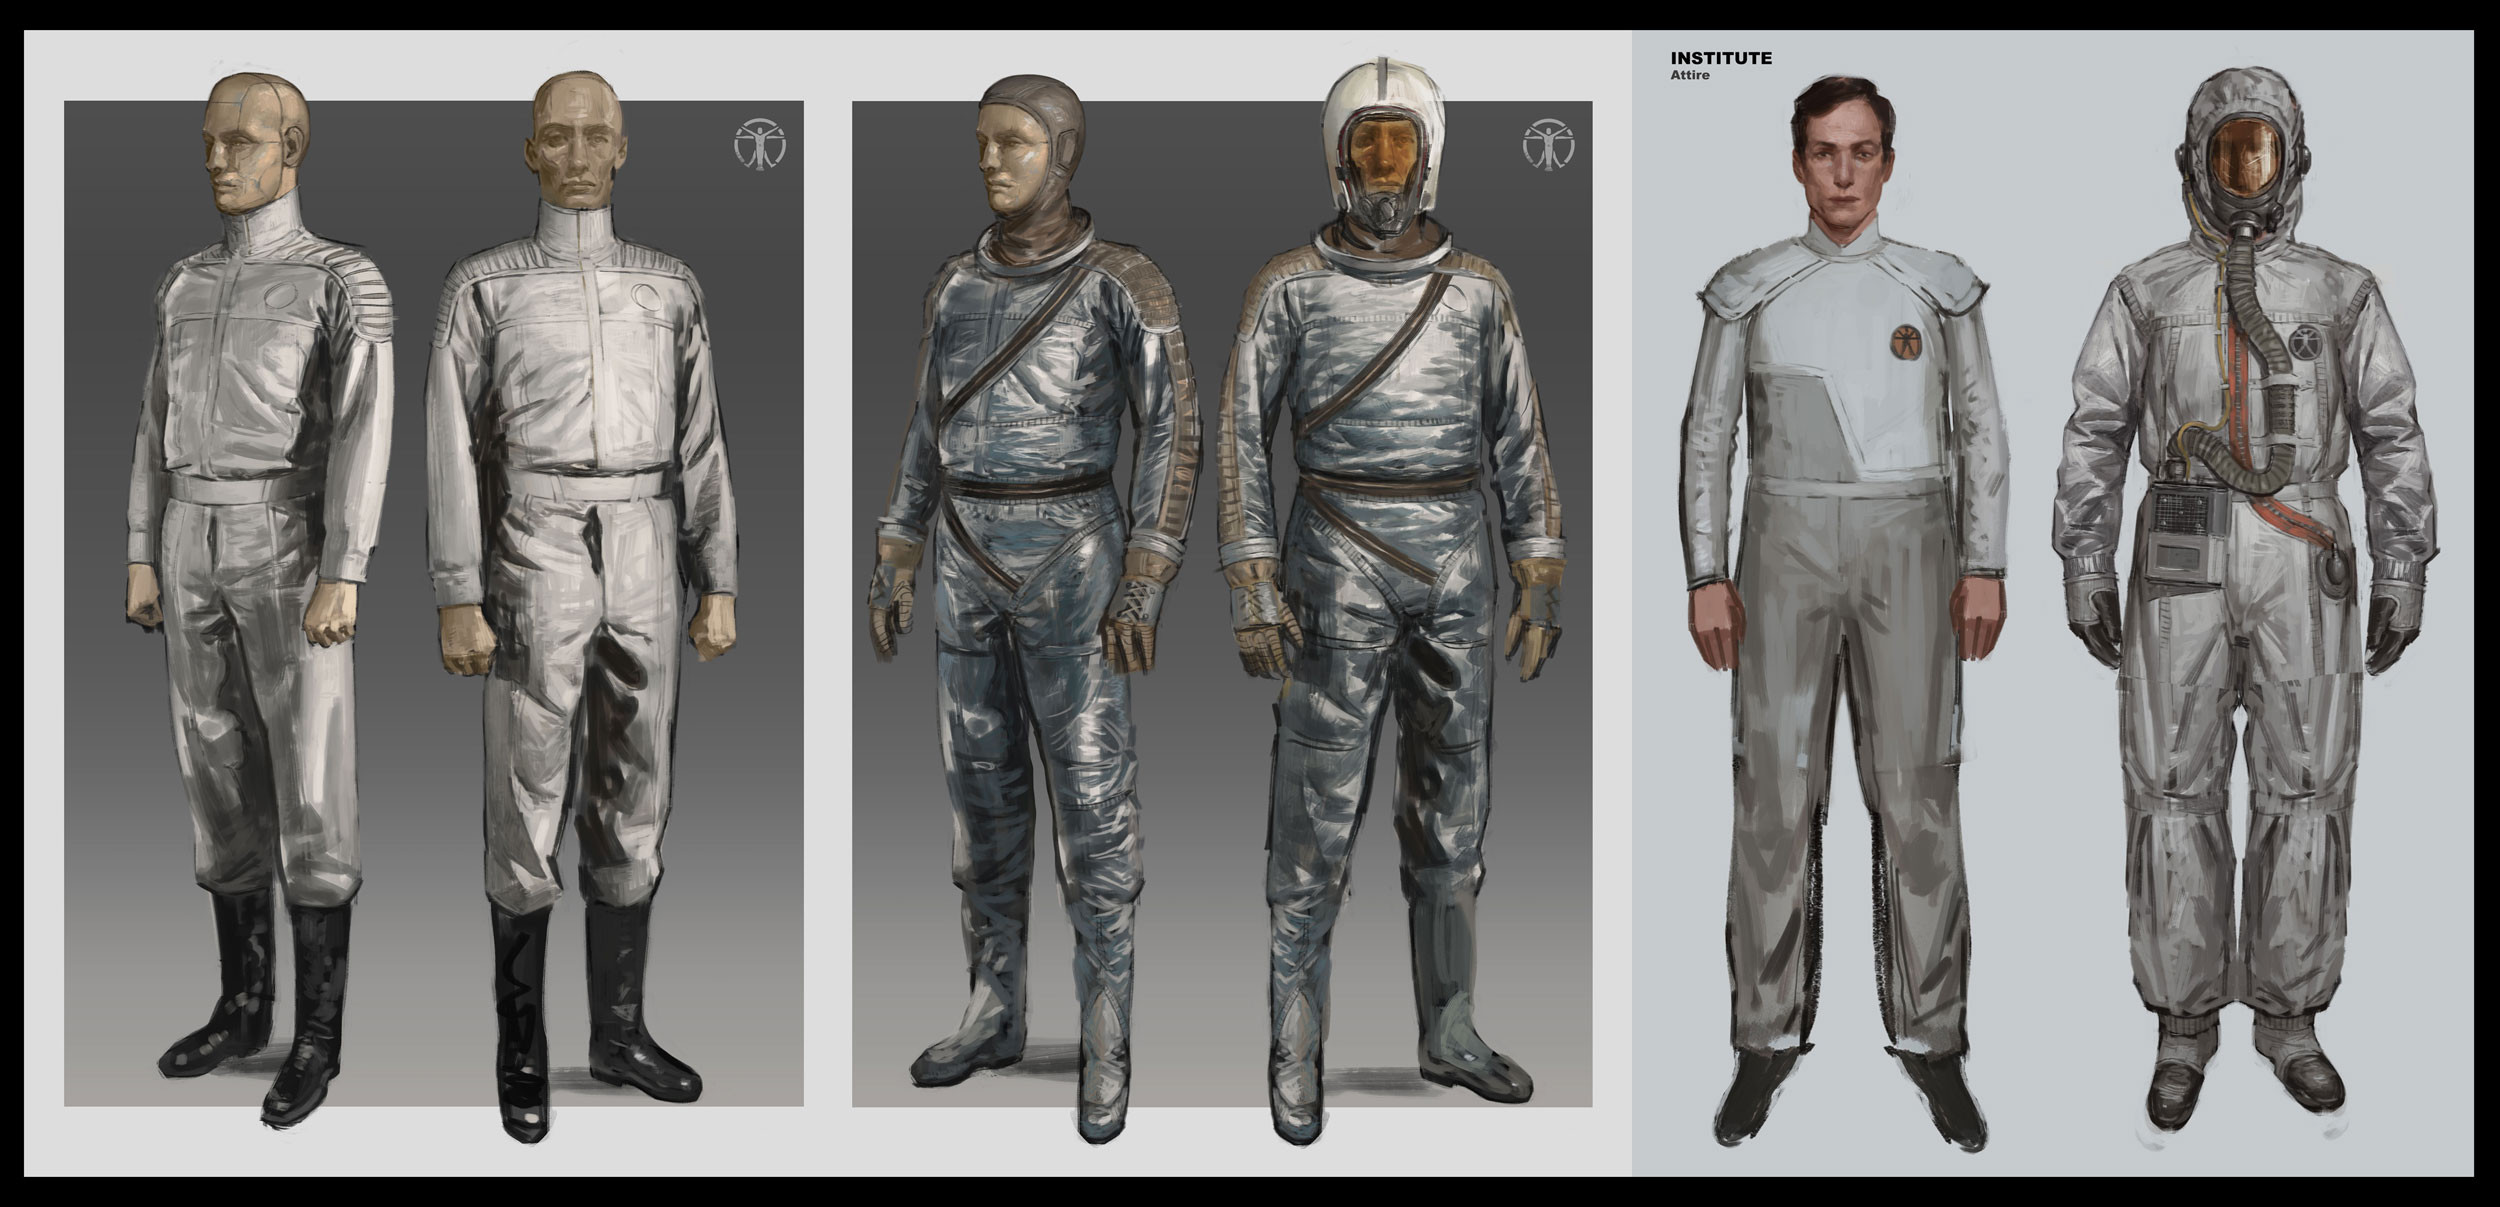 More on Synths and the institute. Synth clothing for indoors and outdoors. Institute clothing and Hazmat suit. Fallout 4 redesigns